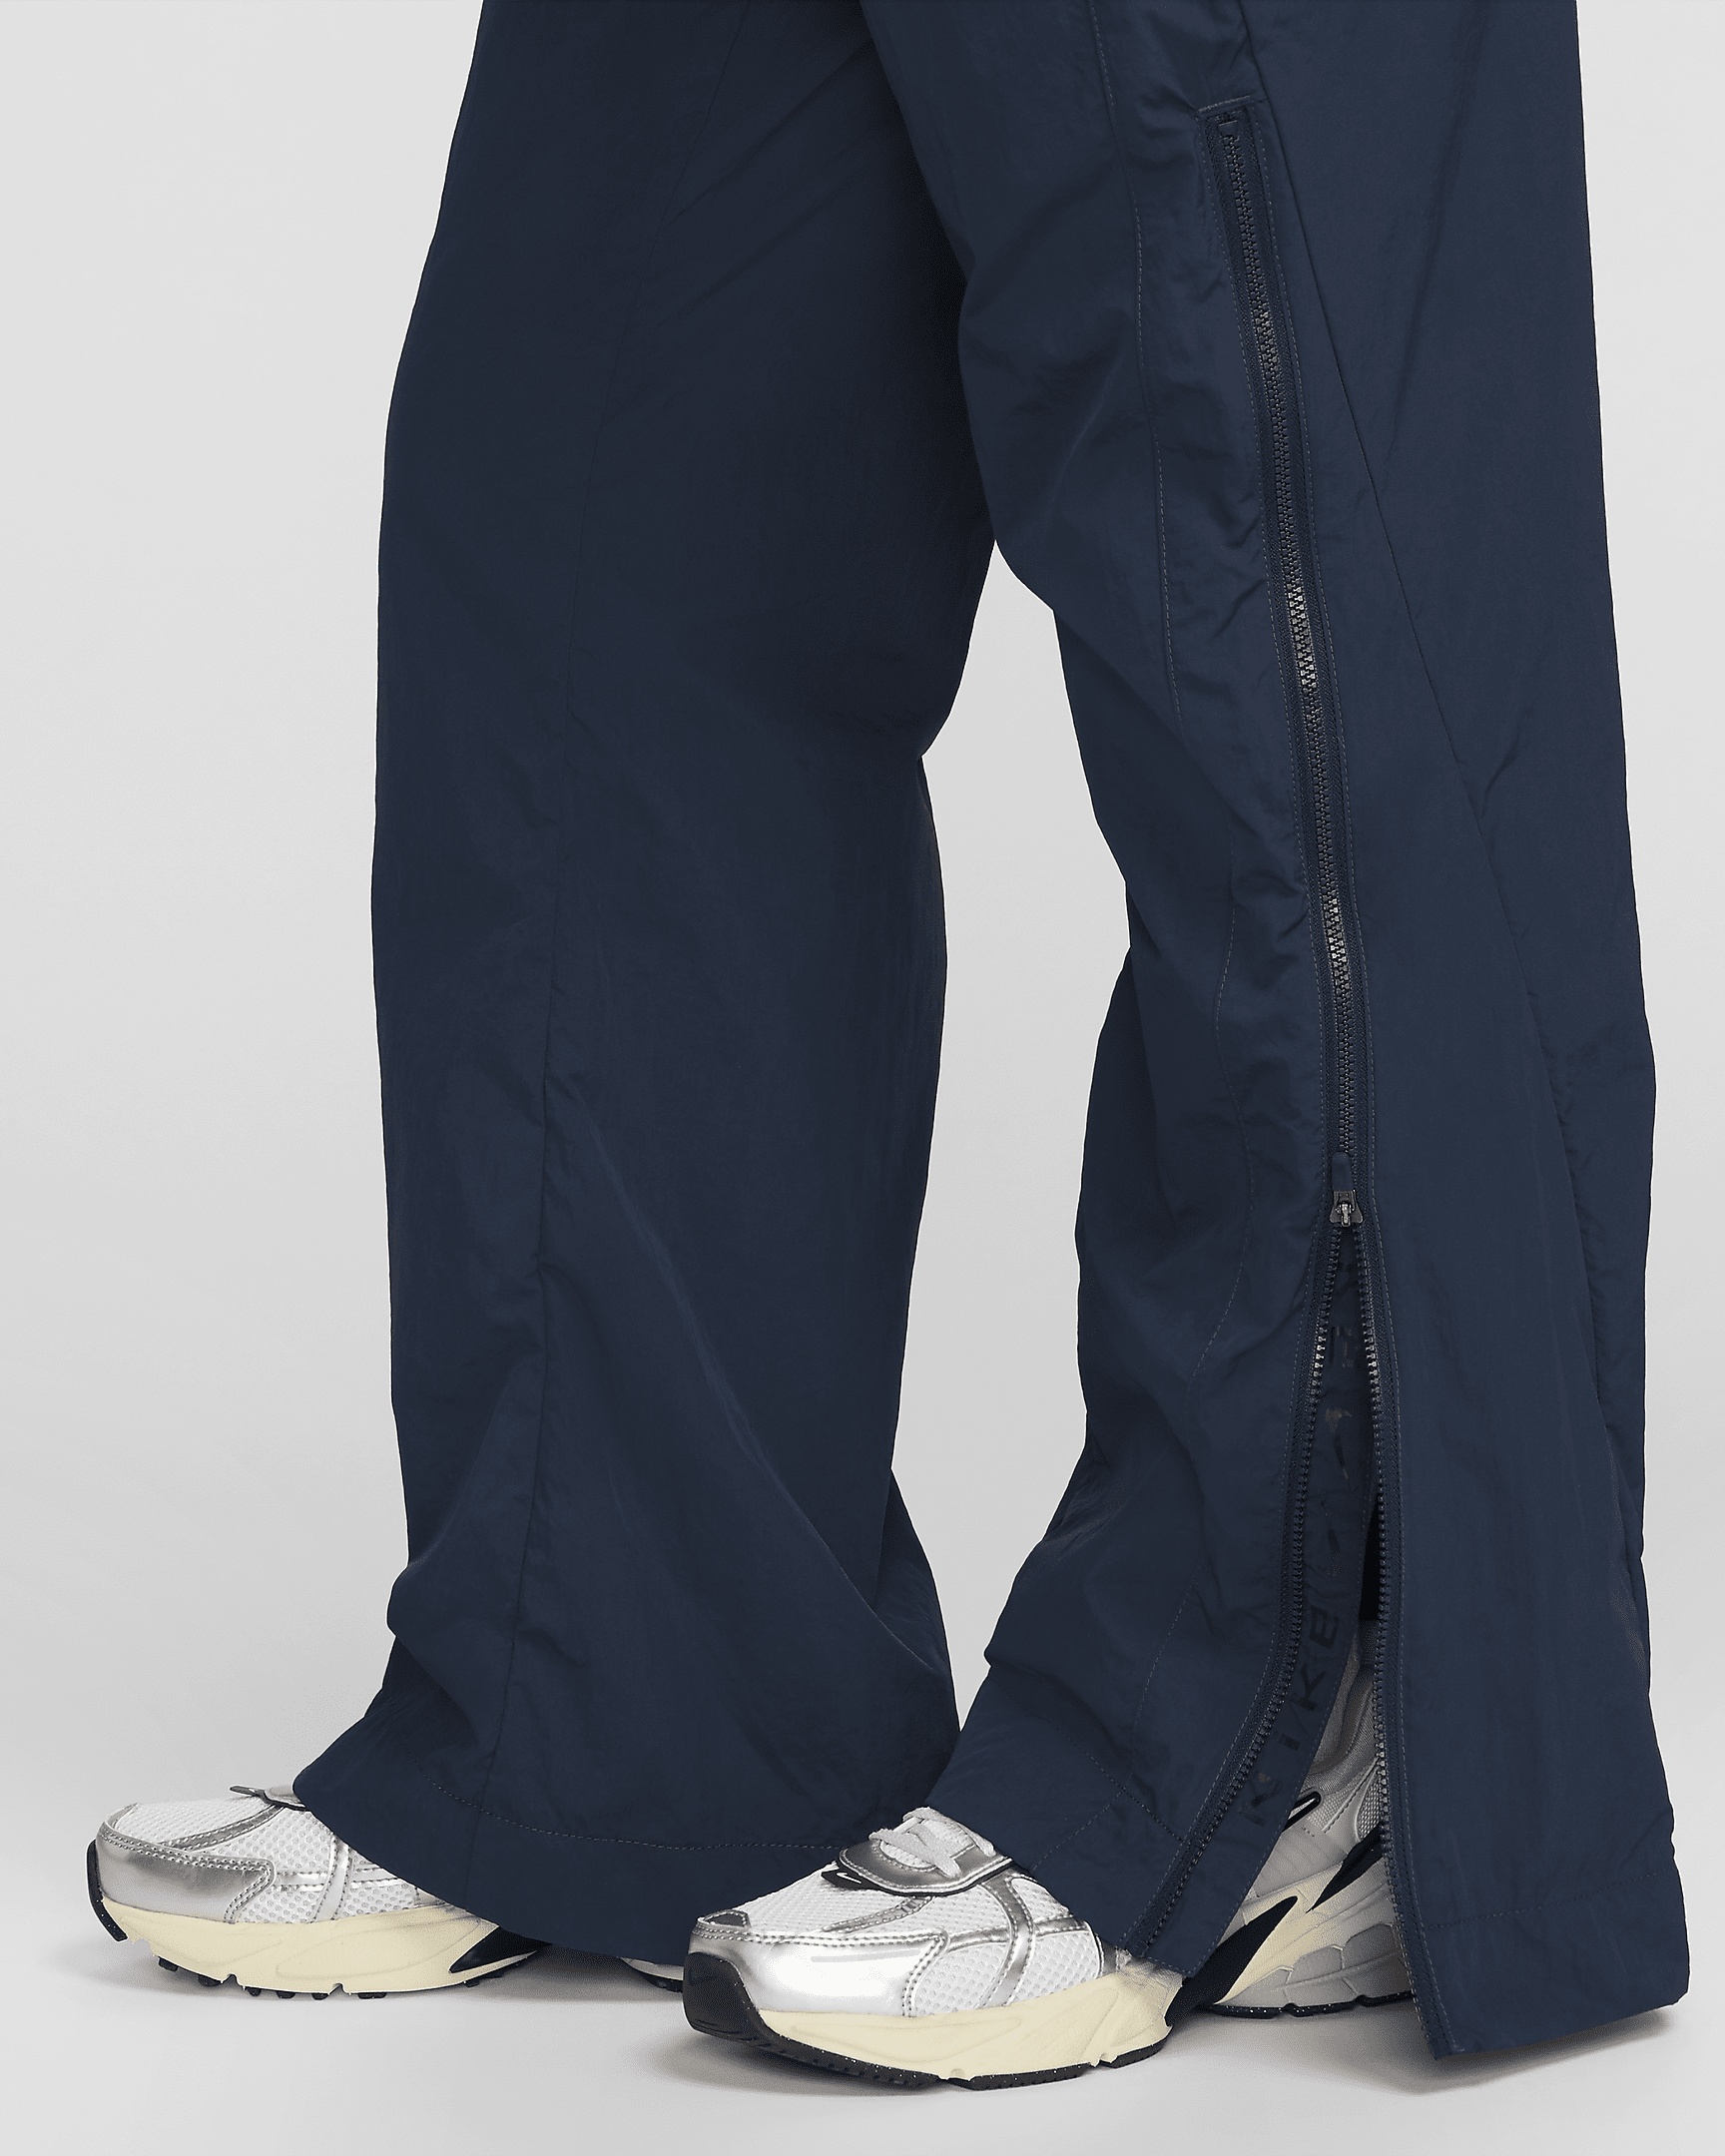 Women's Nike Sportswear Collection Mid-Rise Repel Zip Pants - 5